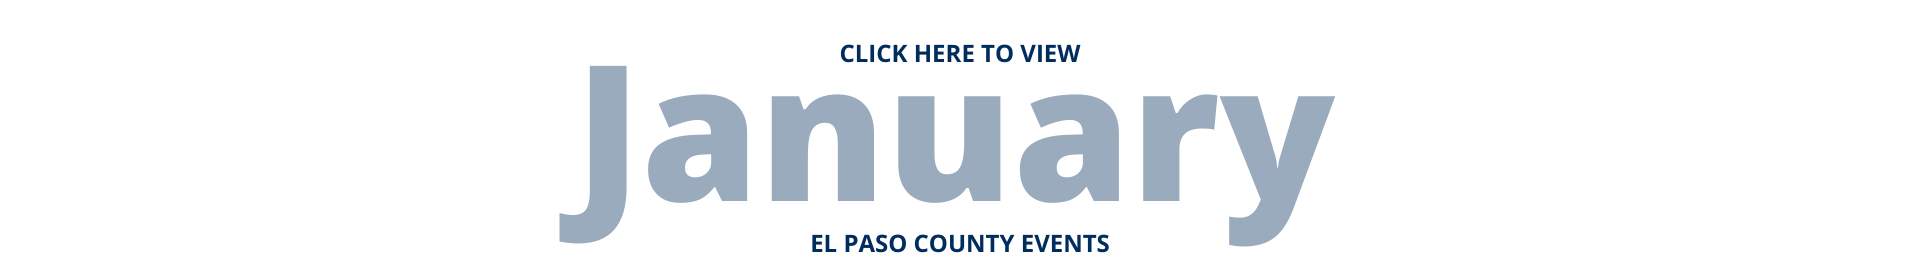 Image of text: "Click here to view January El Paso County events"